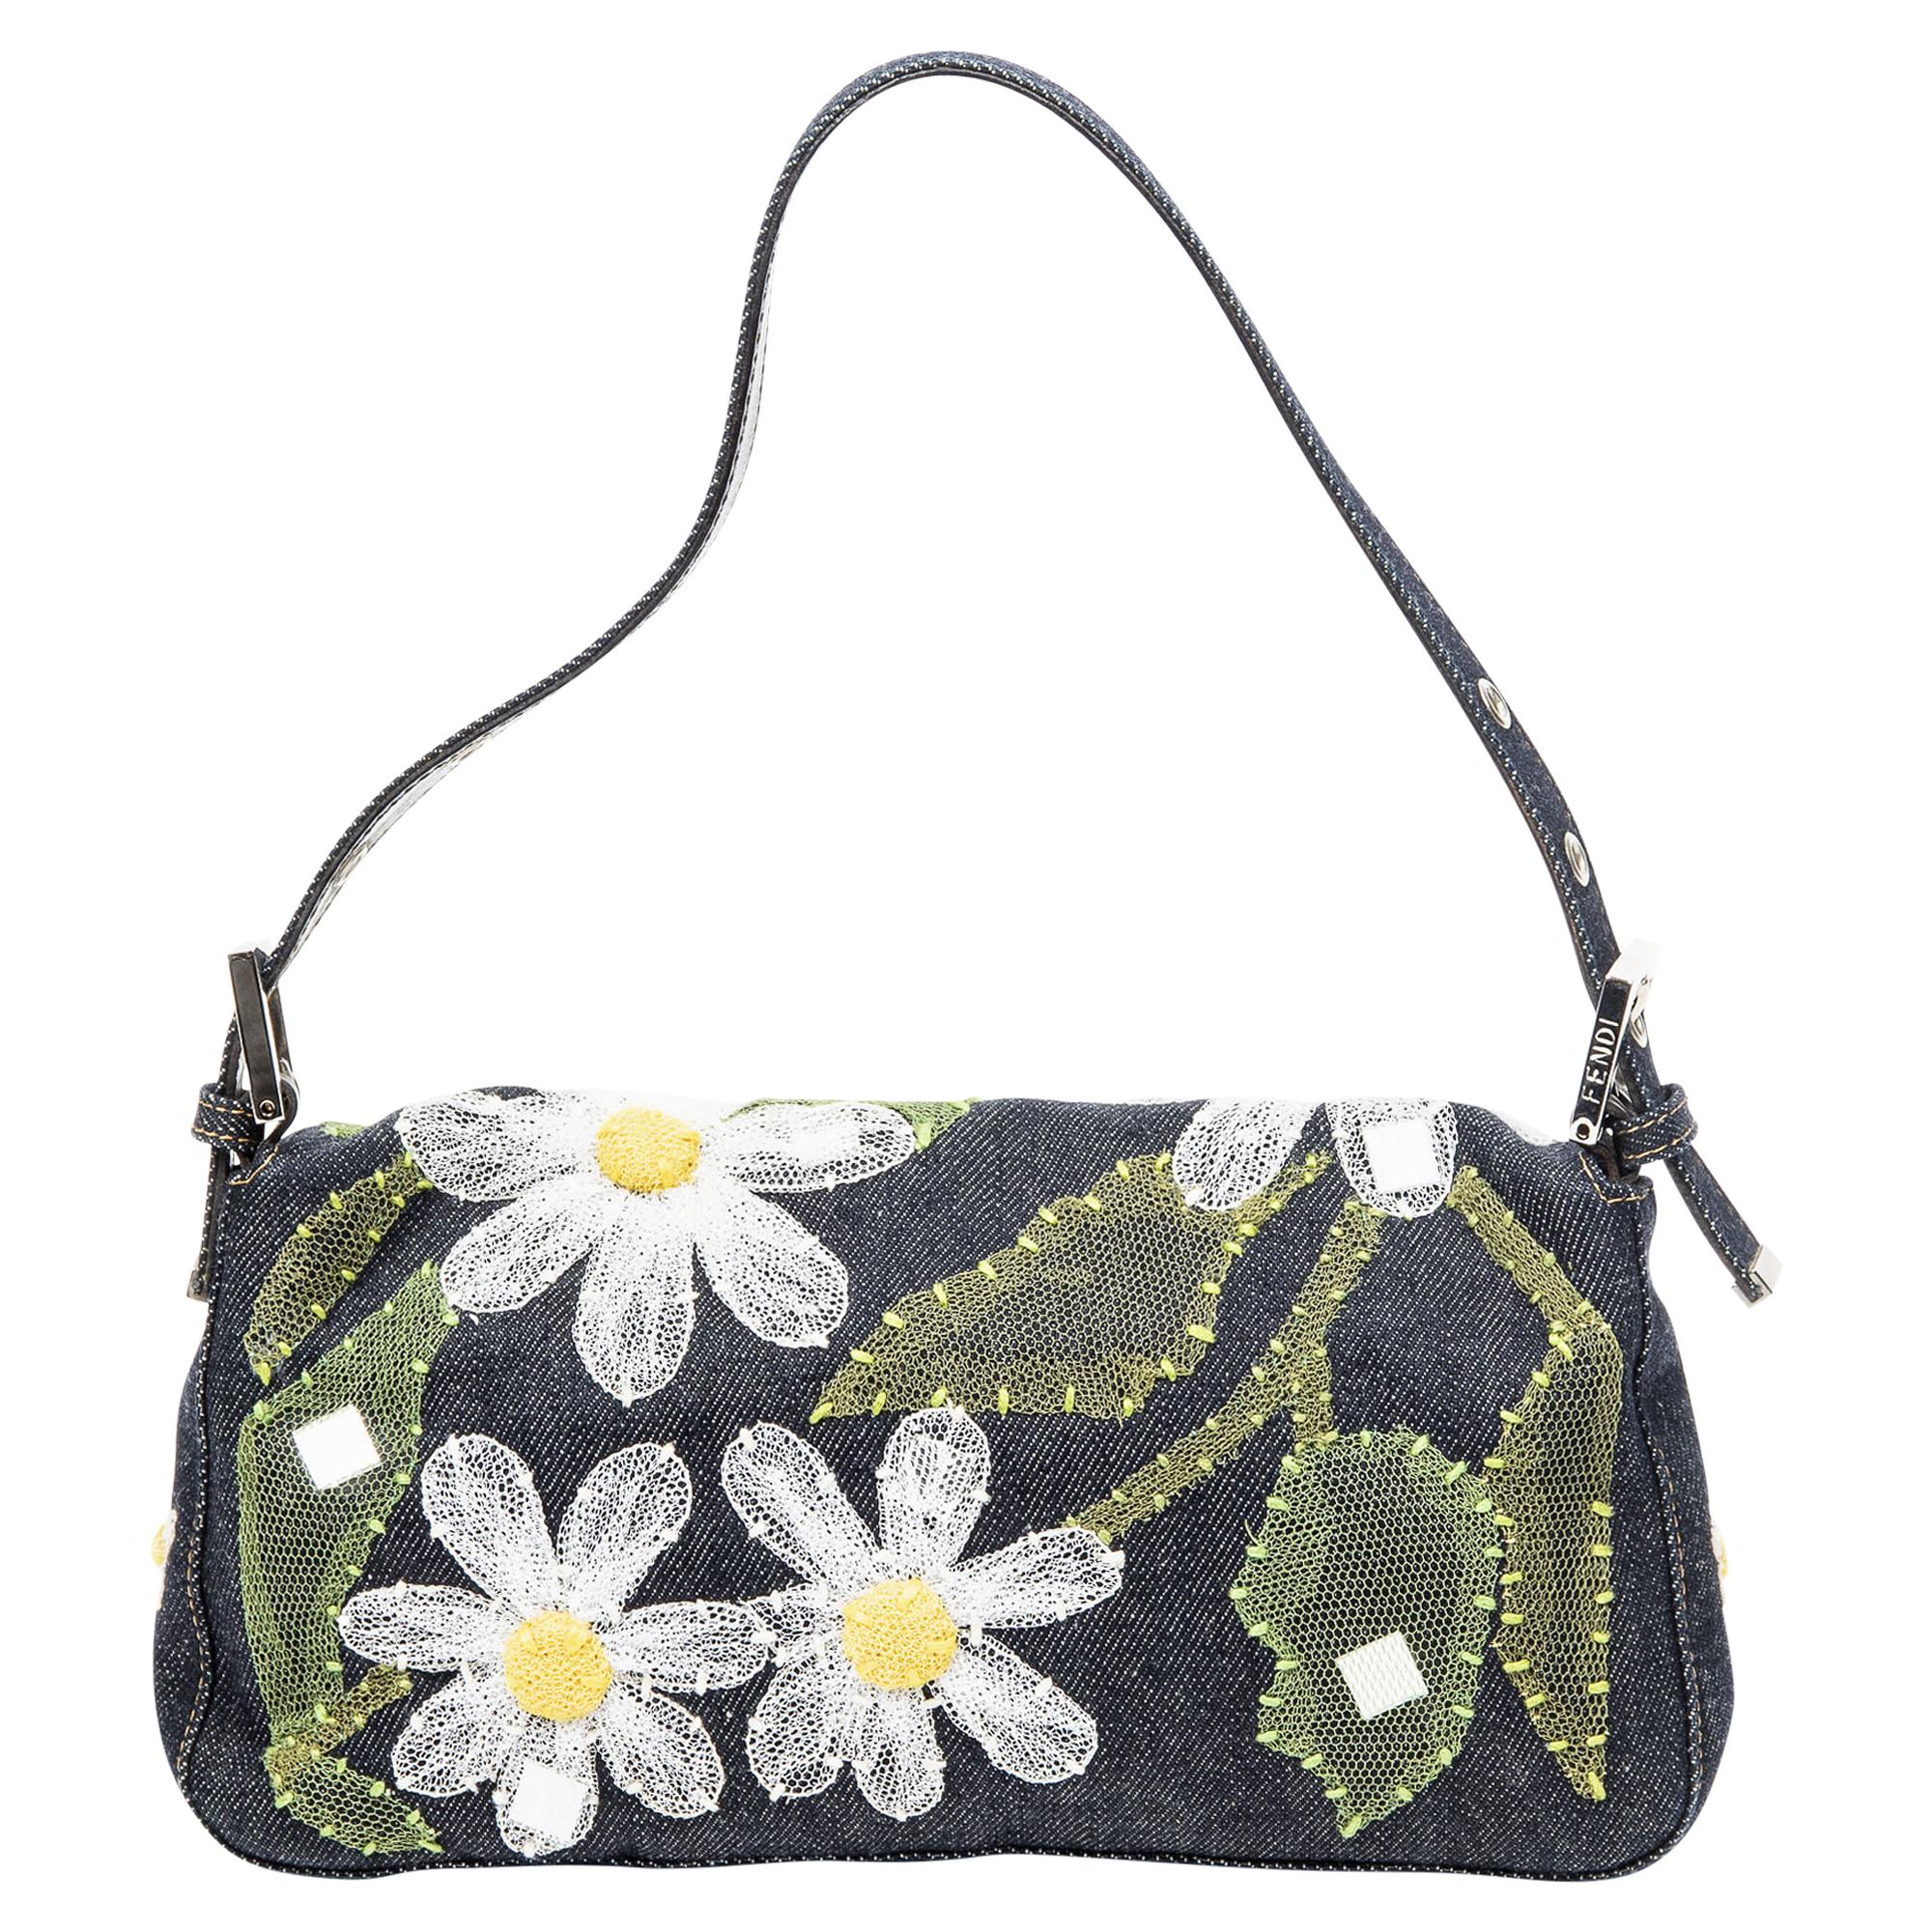 Fendi Limited Edition Floral Embroidered Baguette In Excellent Condition For Sale In Atlanta, GA